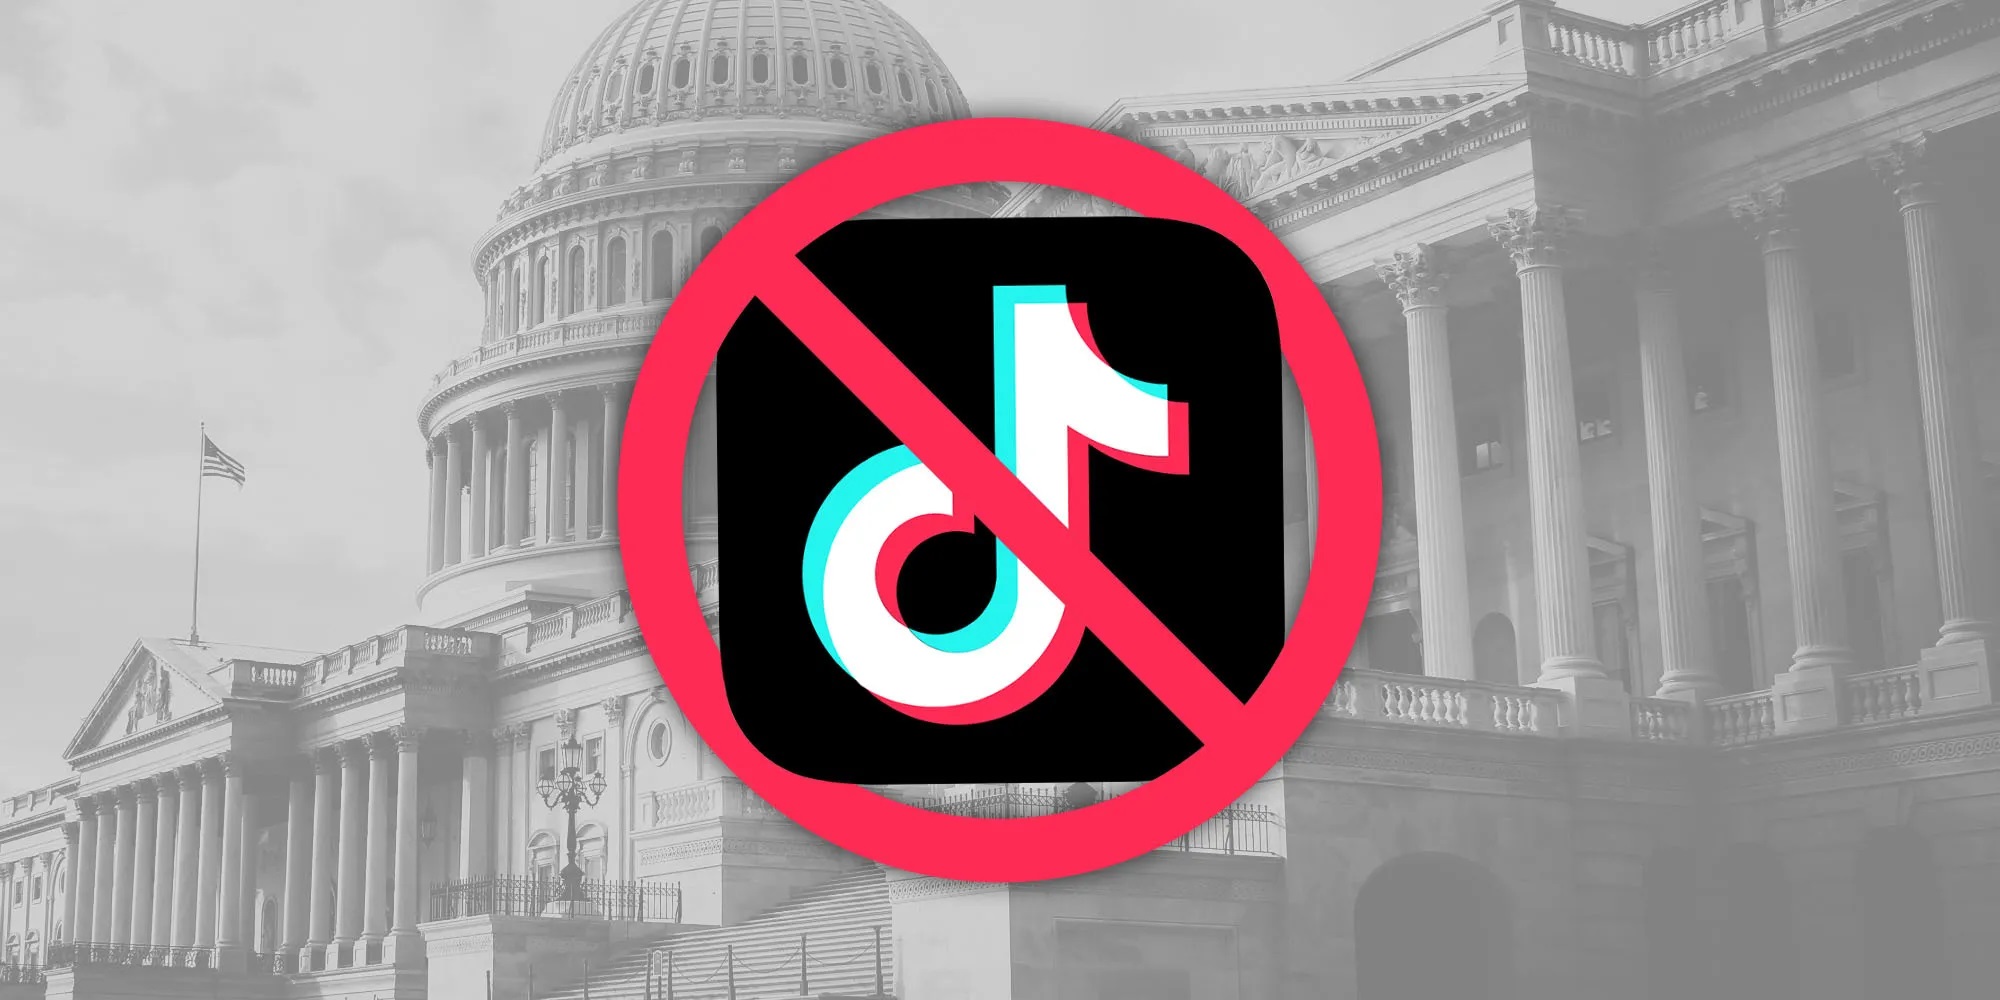 irs-employees-still-access-tiktok-despite-ban-on-government-devices